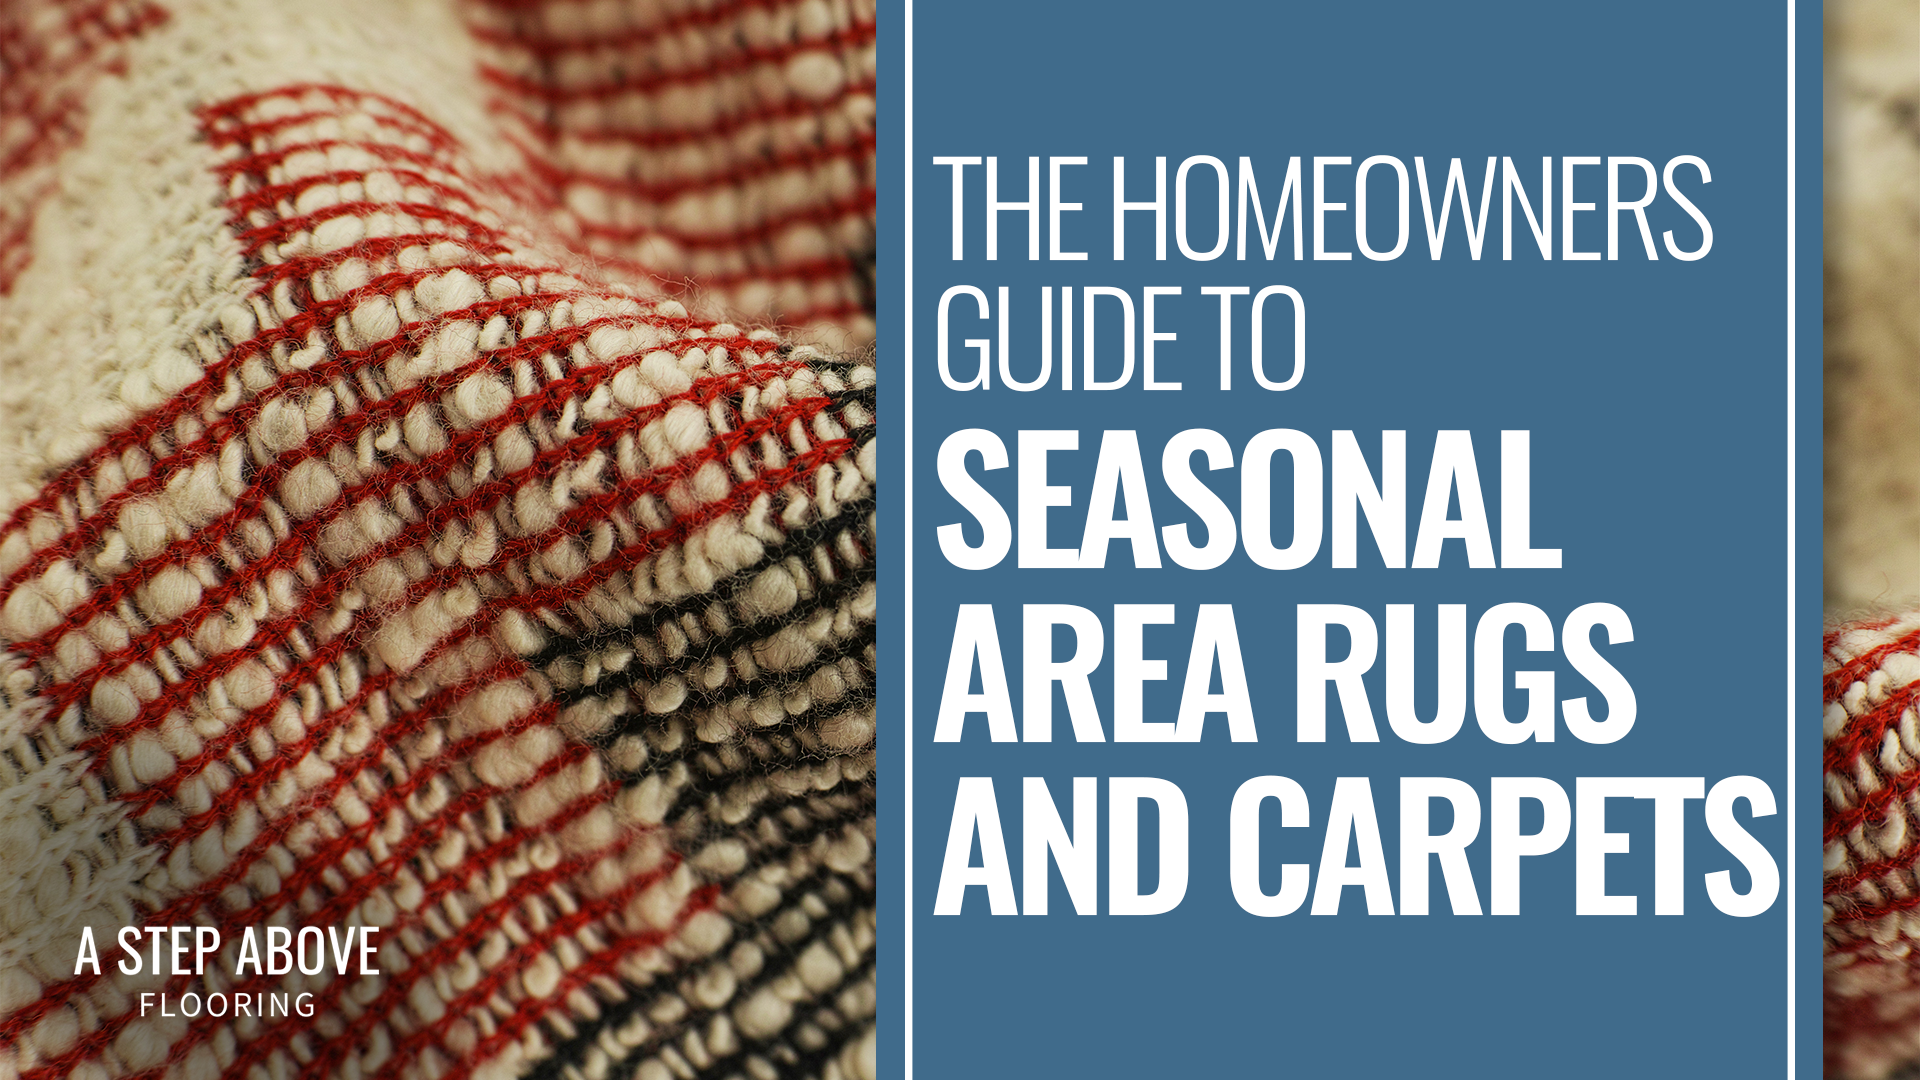 The Homeowner’s Guide to Seasonal Area Rugs and Carpets